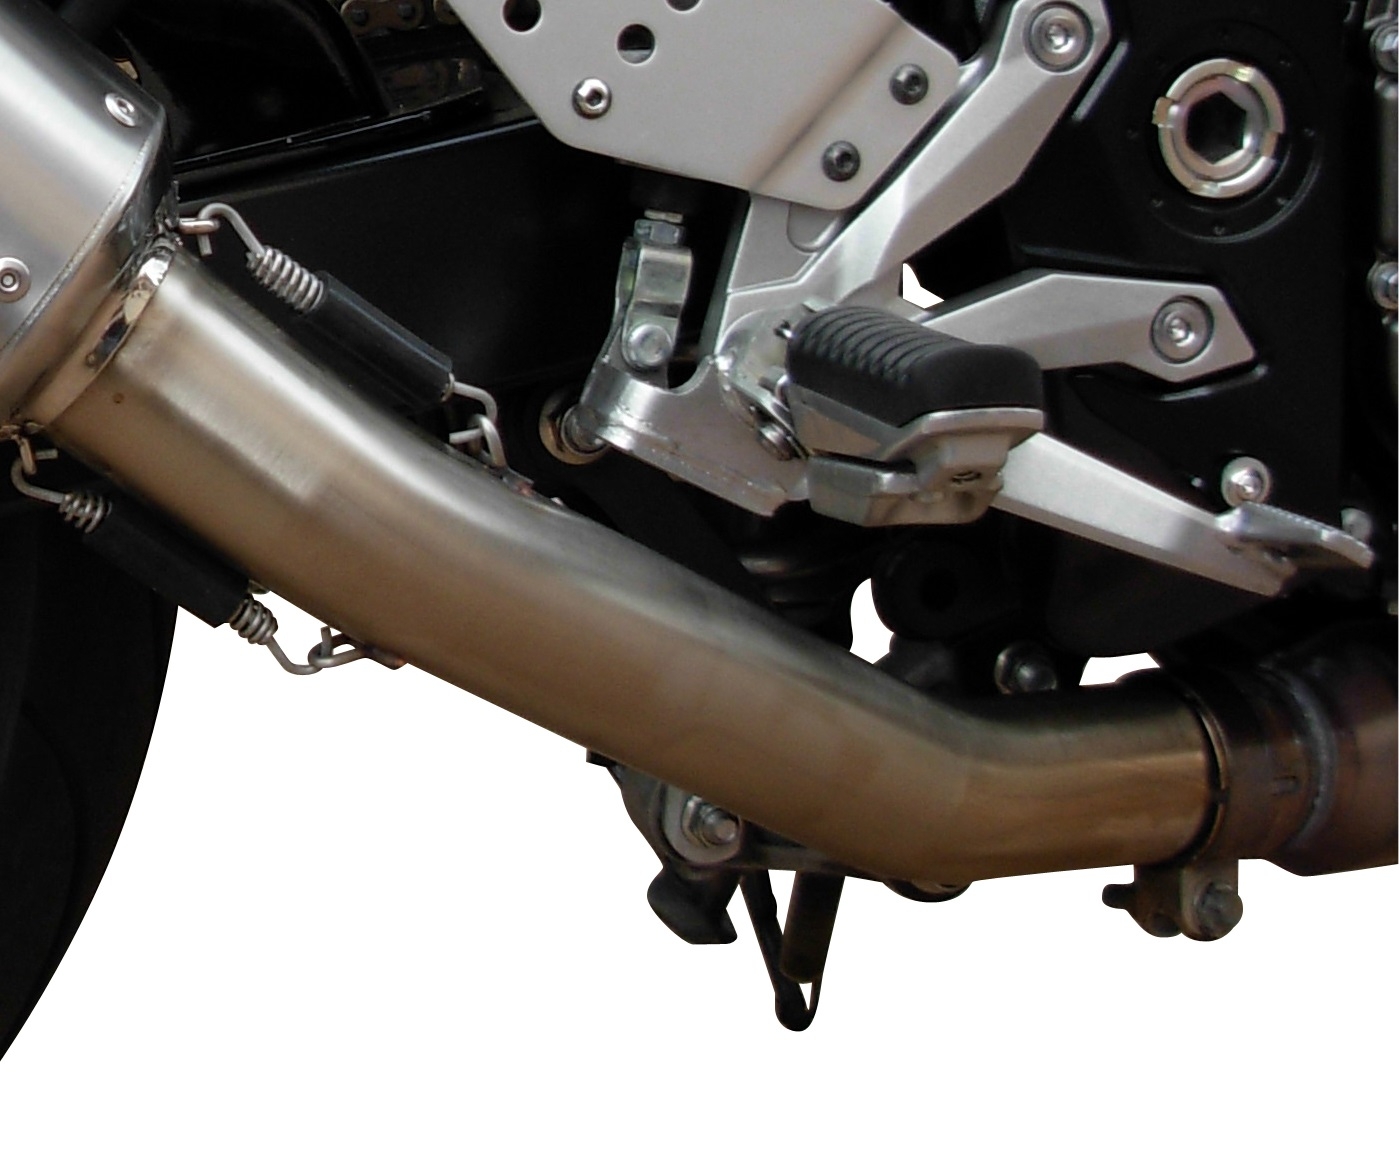 Exhaust system compatible with Kawasaki Z 750 - R 2007-2014, Ghisa , Homologated legal slip-on exhaust including removable db killer, link pipe and catalyst 